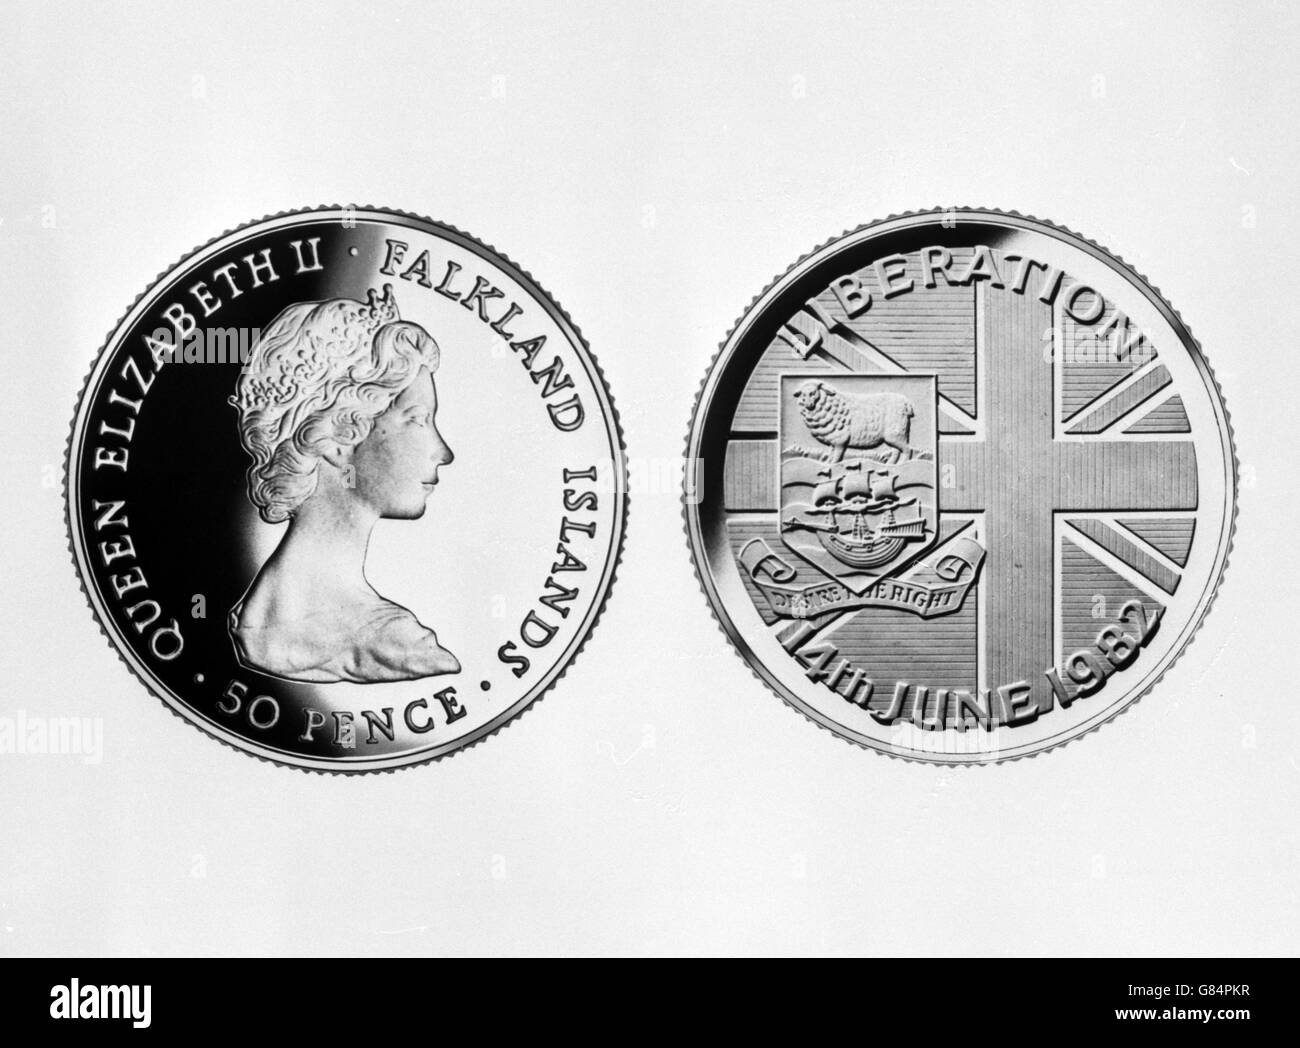 The Falkland Islands Treasury are issuing a special new Crown-size coin to celebrate the liberation. The reverse design symbolises the restoration of their freedom under the British Flag. It is sculpted by Philip Nathan, designer of the UK Royal Wedding Crown, which was issued in 1981. The obverse design bears the coinage portrait of Queen Elizabeth II. Stock Photo